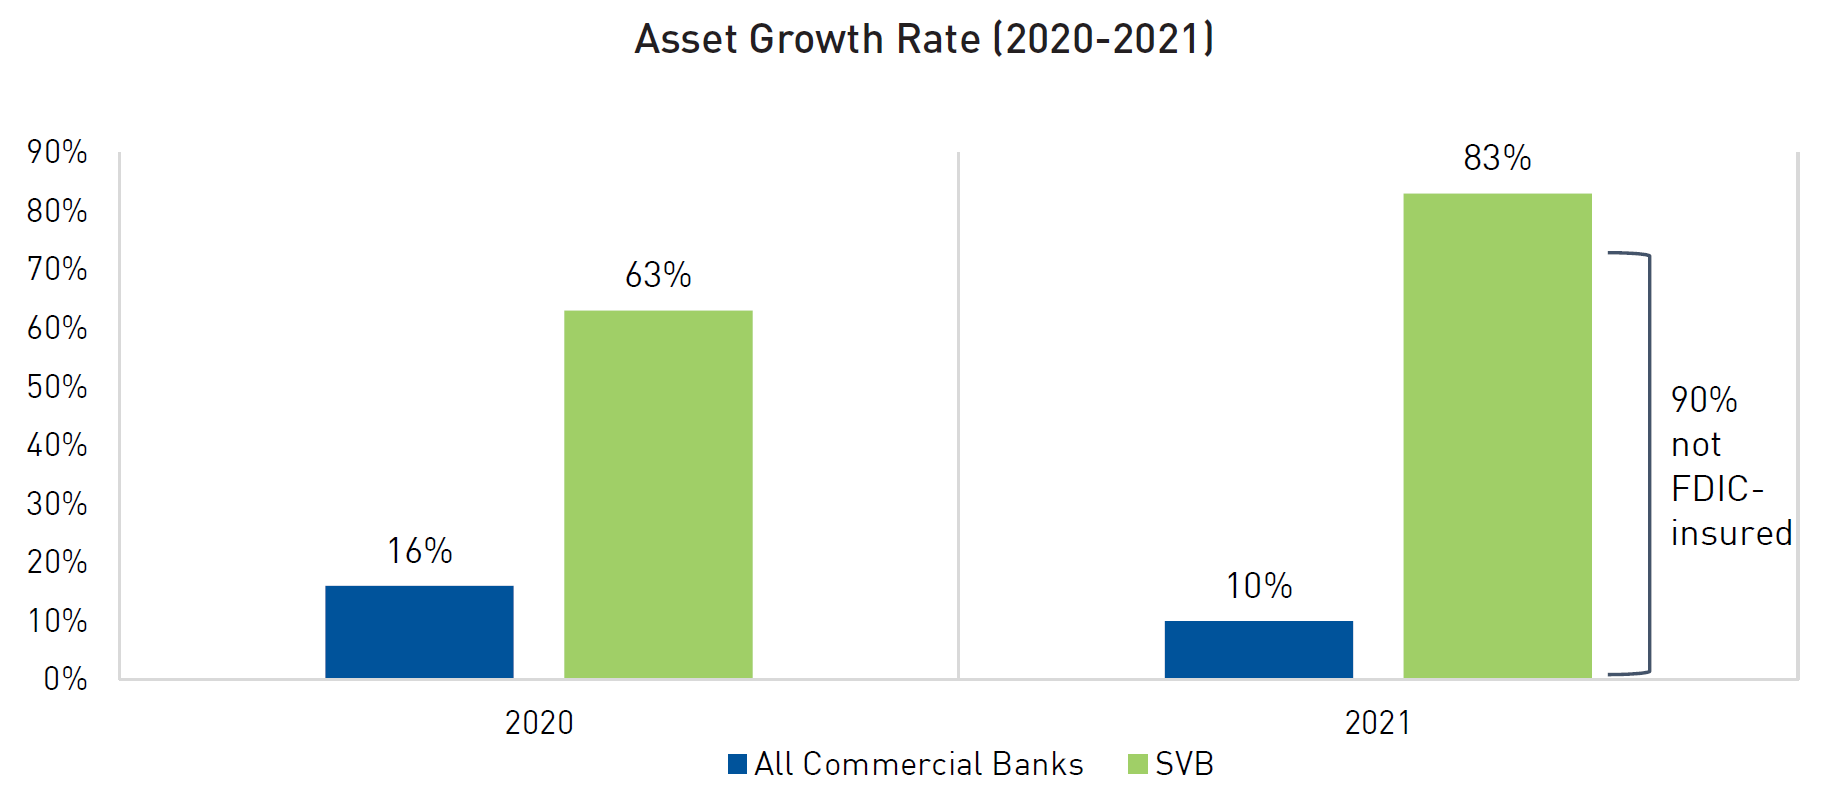 Asset Growth Rate Chart showing 2020 and 2021